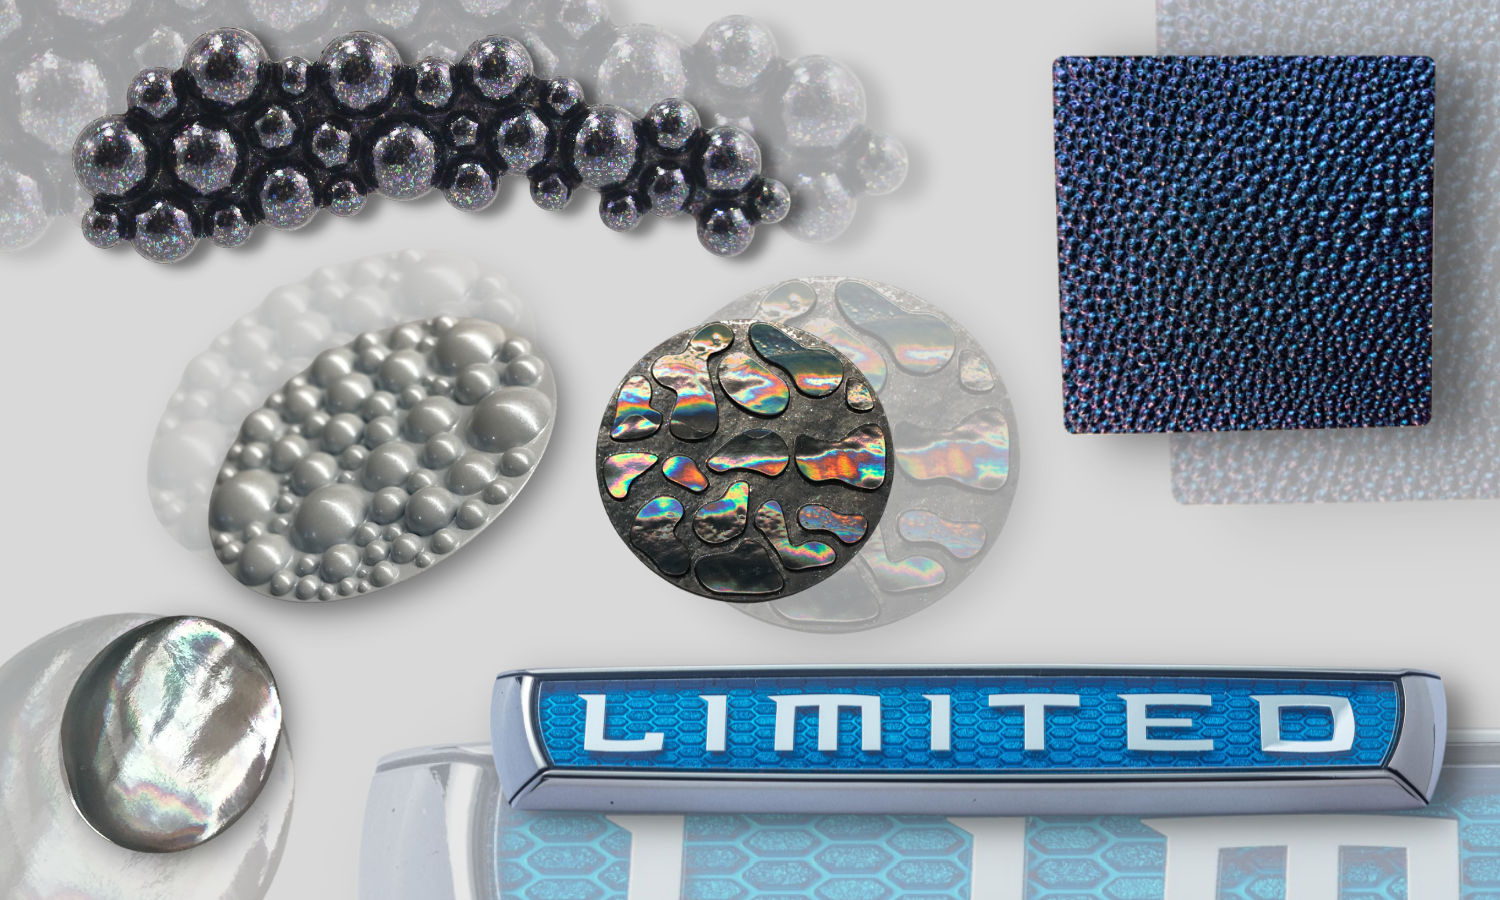 Collage of decorative trim parts. Triangular shaped part with raised varying sized semi-spheres with a metallic fleck black iridescent paint. Square part with 3D texture on top surface to mimic a stingrays skin; the entire part is painted a bluish purple shimmery paint. Two circle pieces in the center. One with raised varying sized semi-spheres painted iridescent white. The other circle is a mother of pearl texture that looks like a seashell chrome in color. Rectangle with chrome border, blue transparent background and chrome letters that say LIMITED.